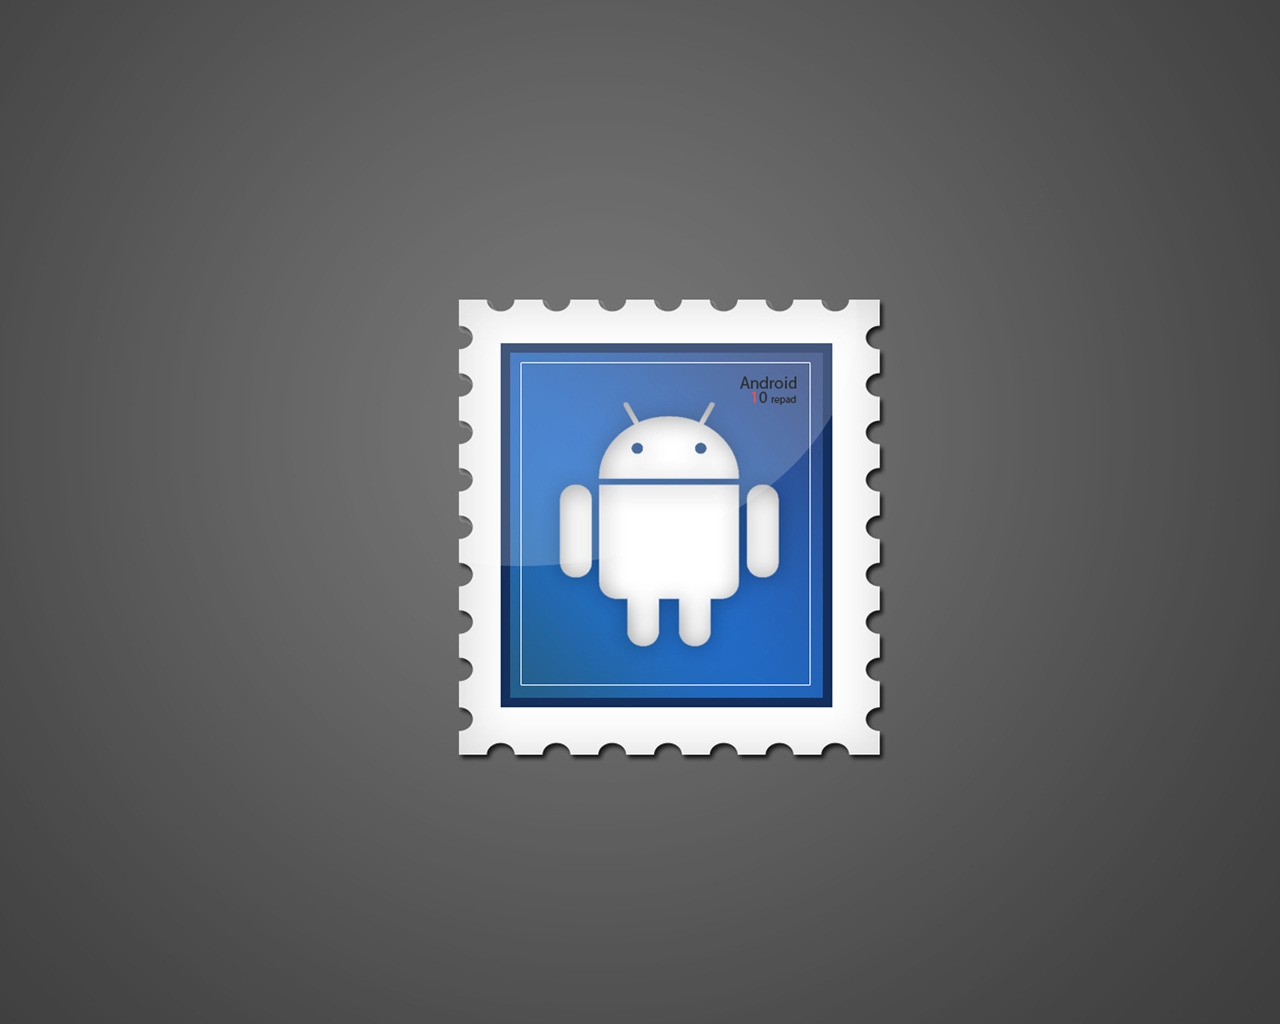 Android Stamp for 1280 x 1024 resolution